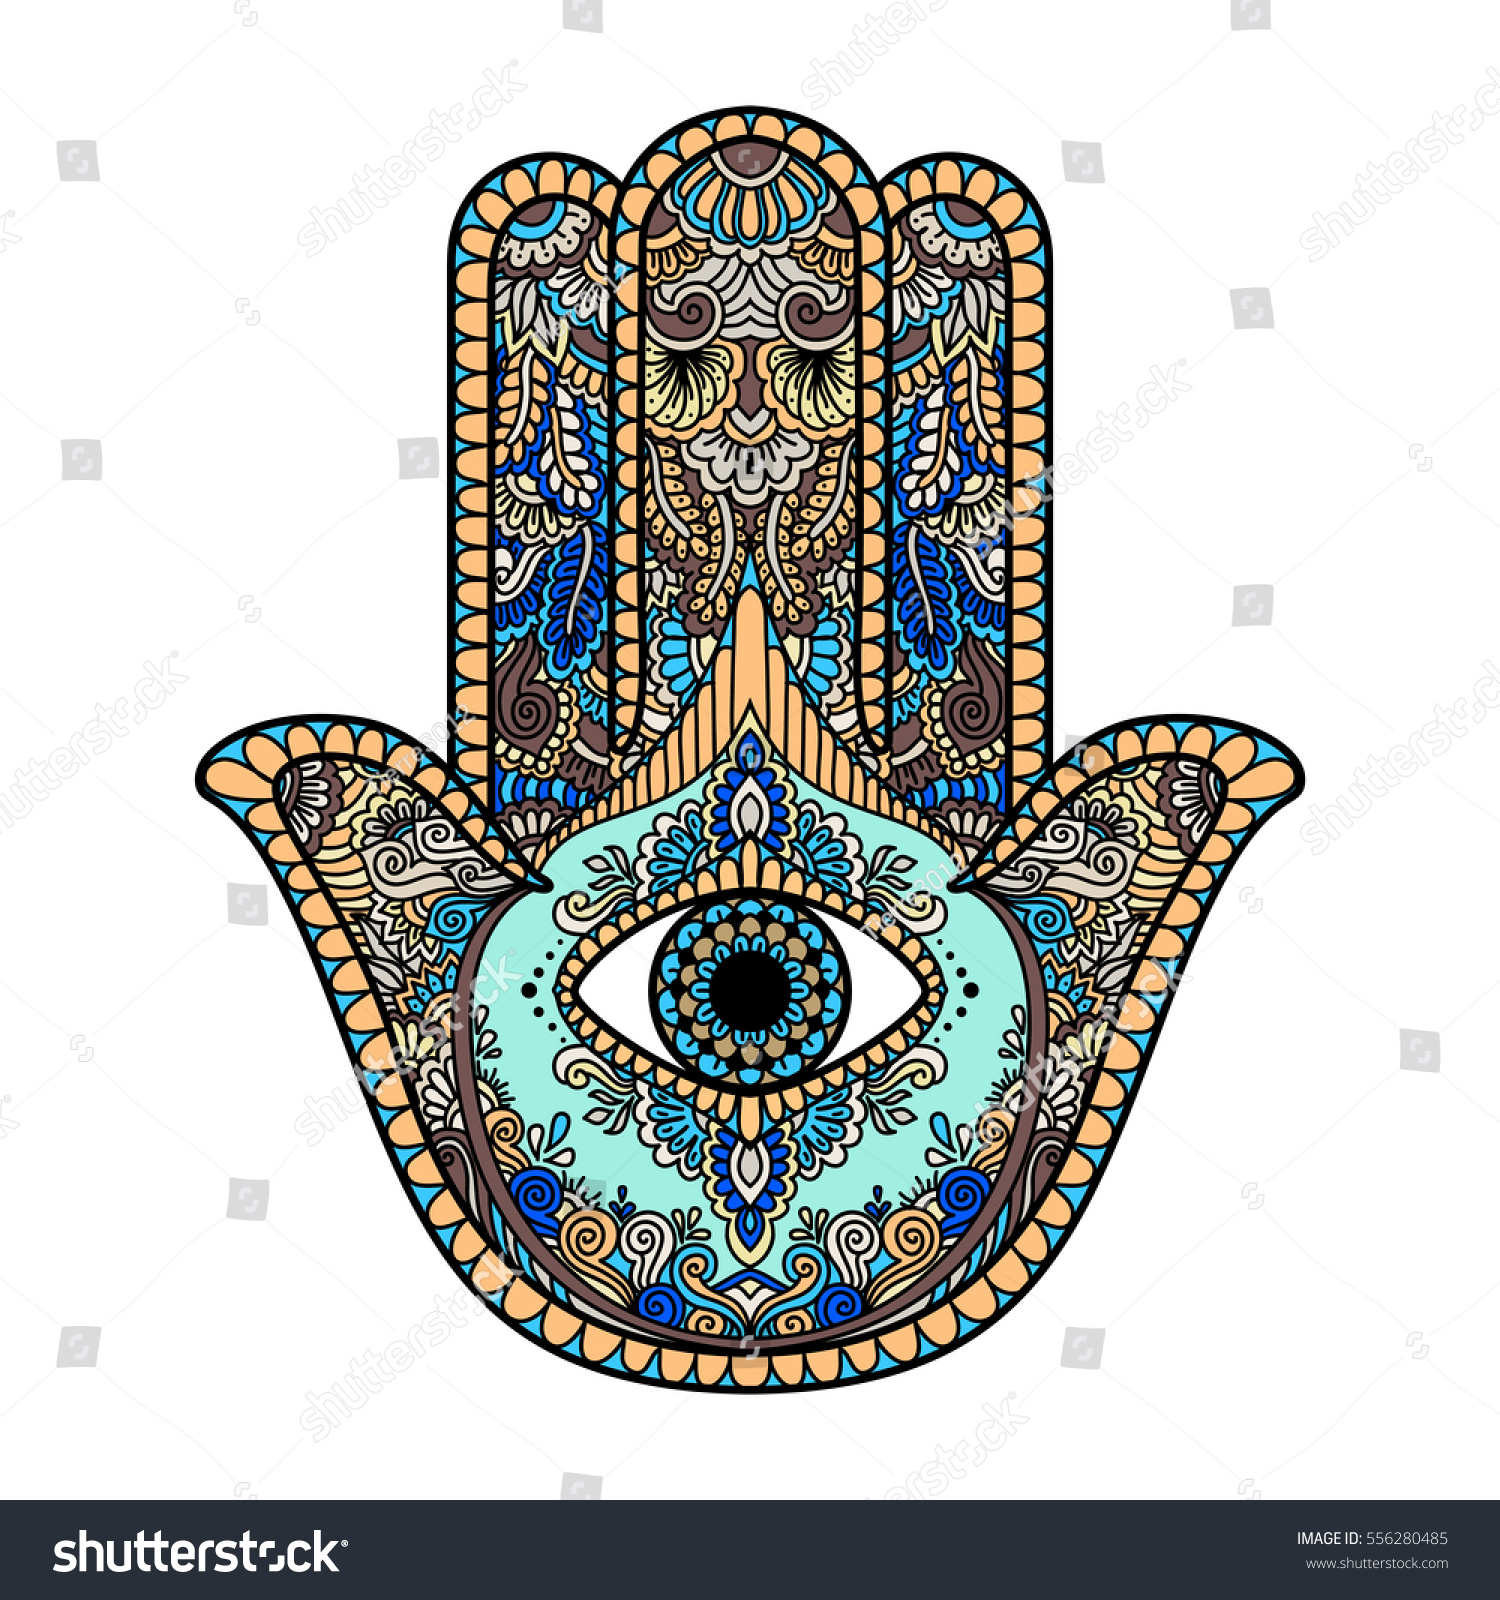 multicolored illustration of a hamsa hand symbol. Hand of Fatima religious sign with all seeing eye. Vintage bohemian style. Vector illustration in doodle zentangle style. #556280485